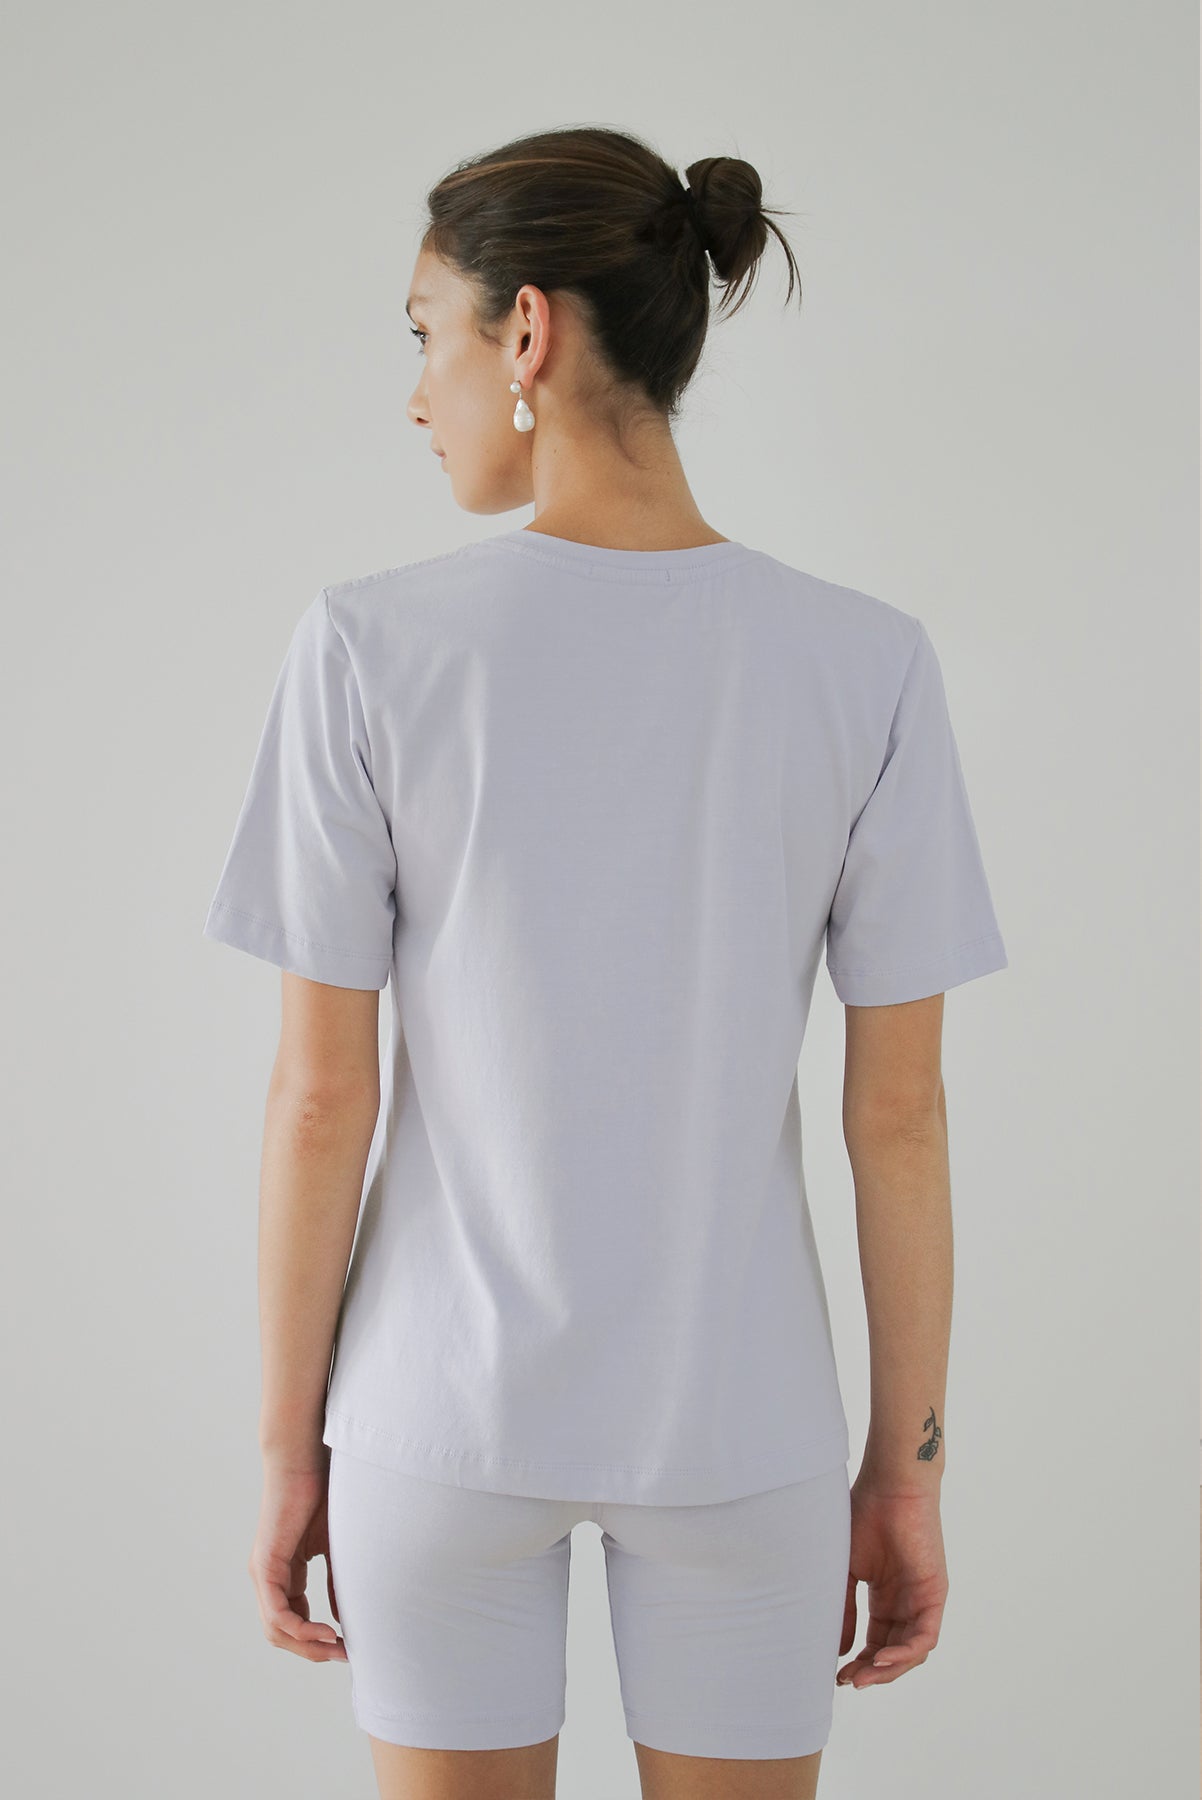 Solar Powered T-shirt - Marshmallow - LOCLAIRE